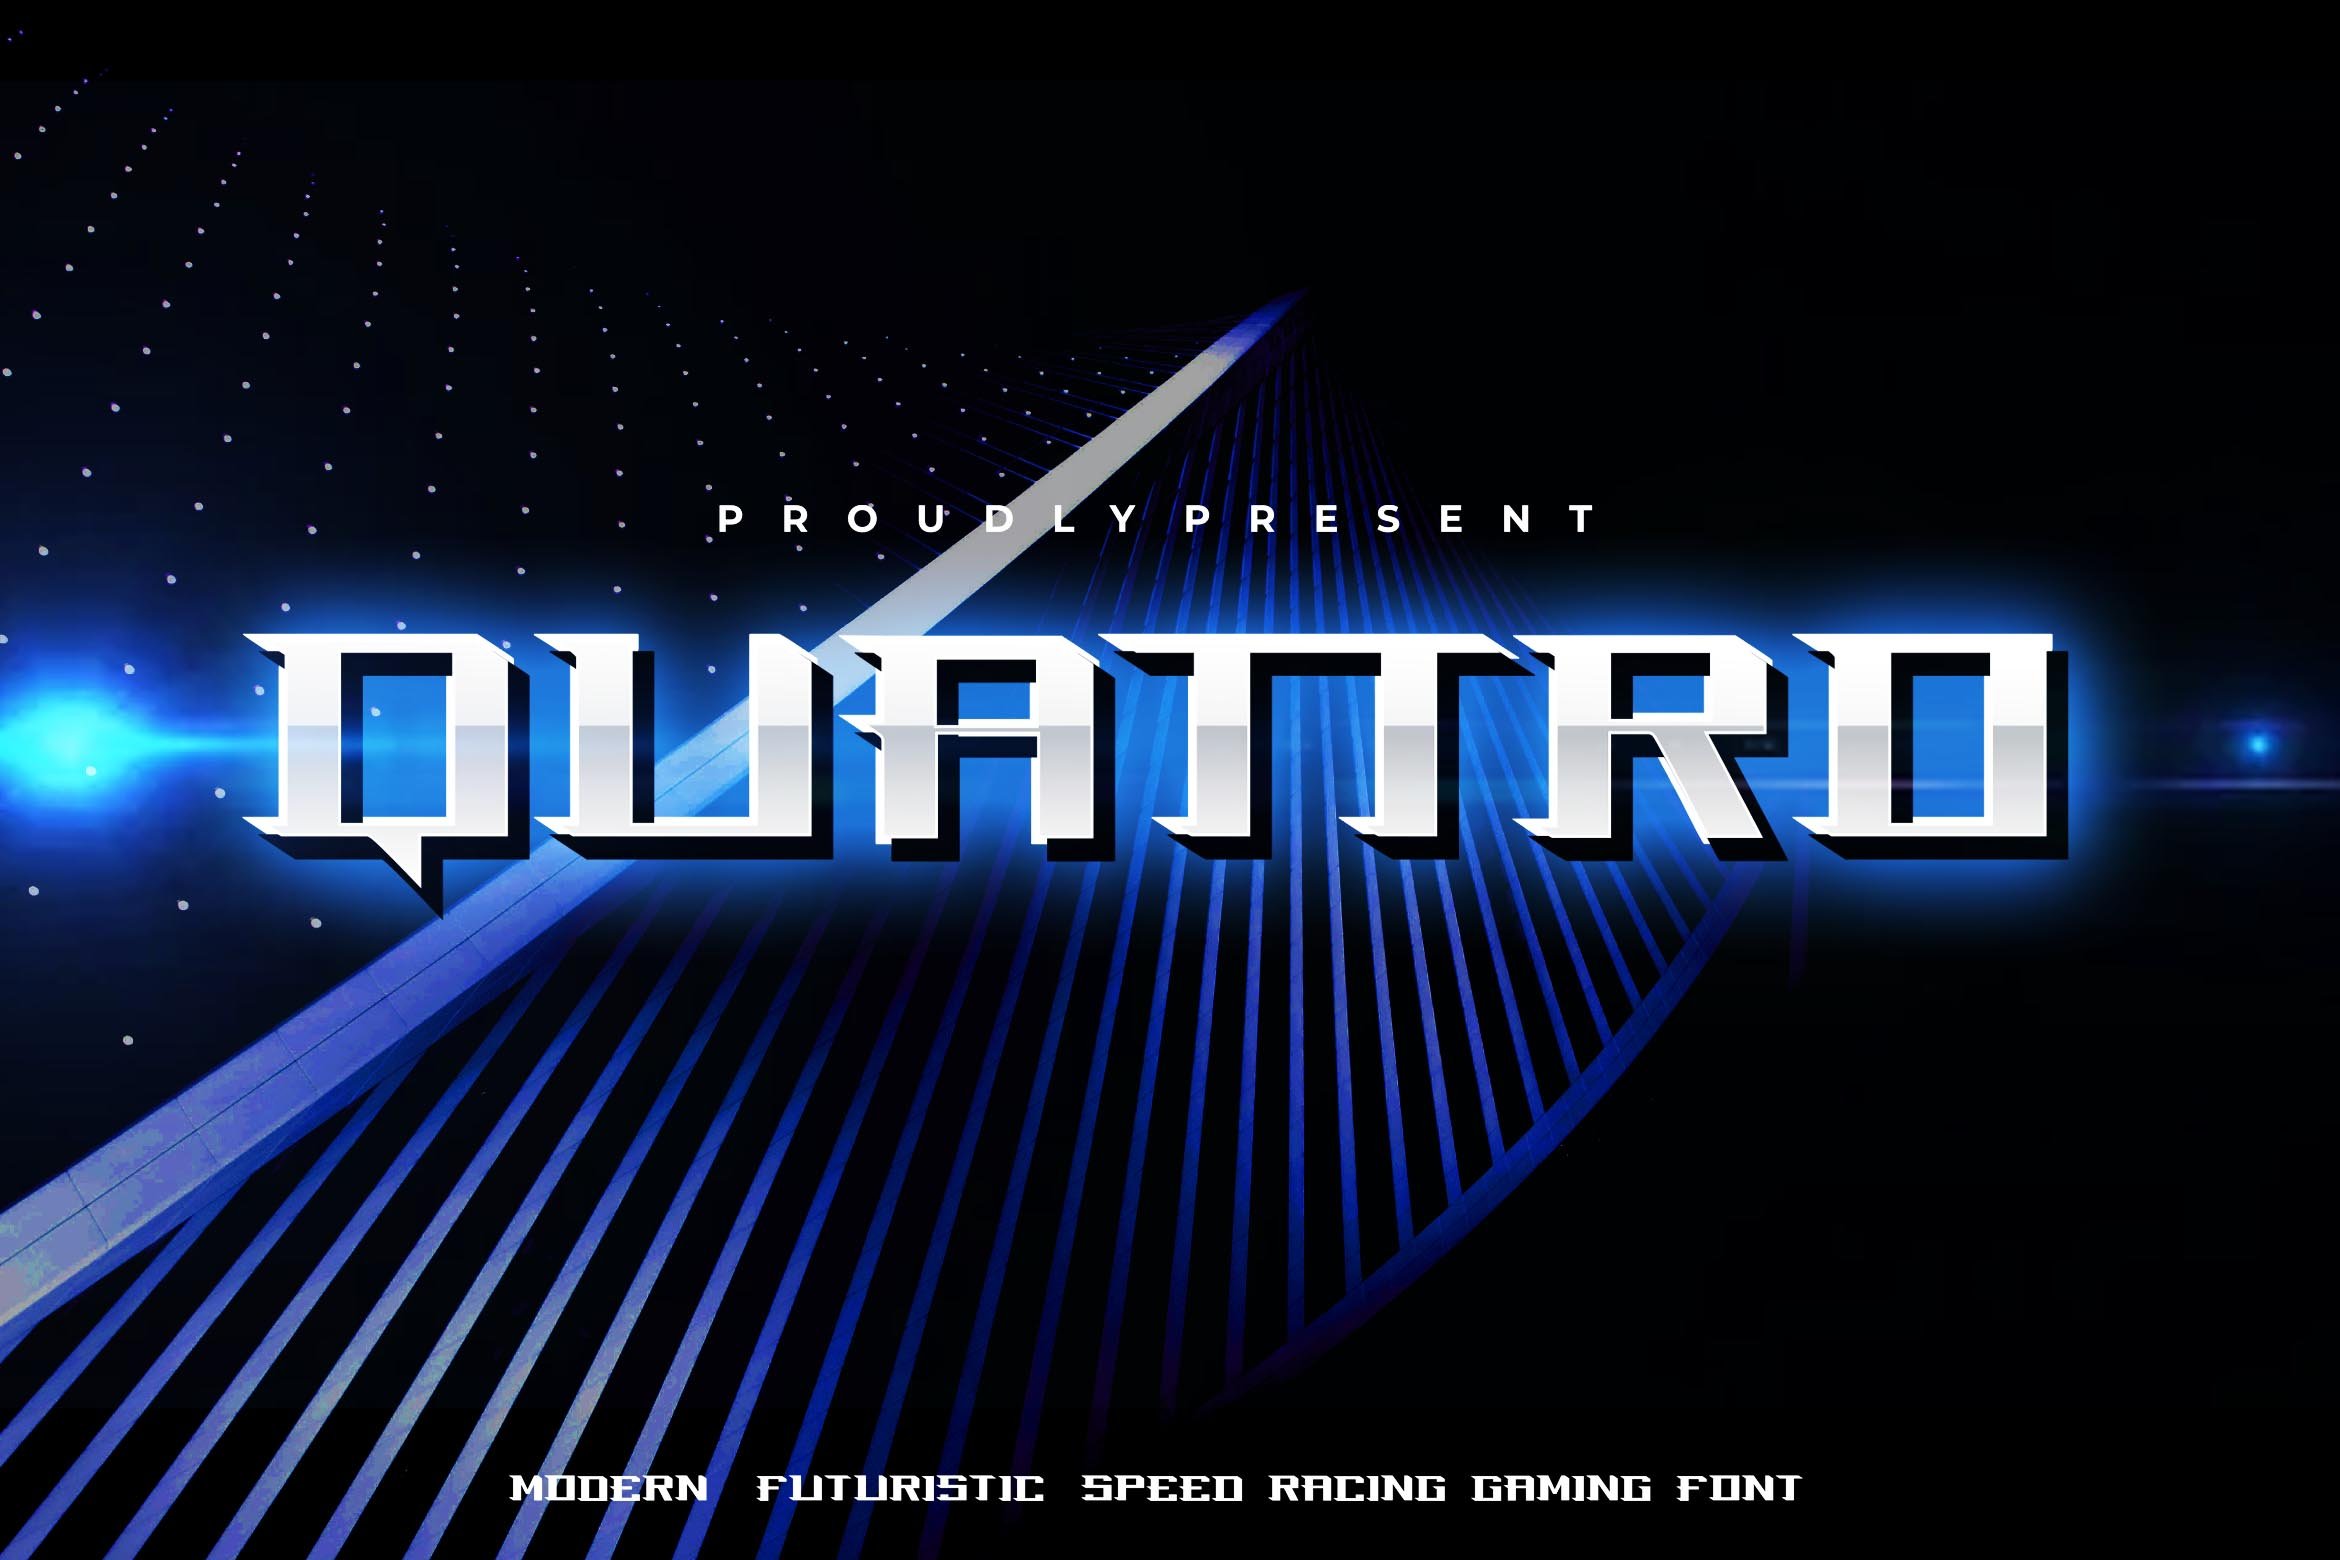 Quattro - Modern racing gaming font cover image.